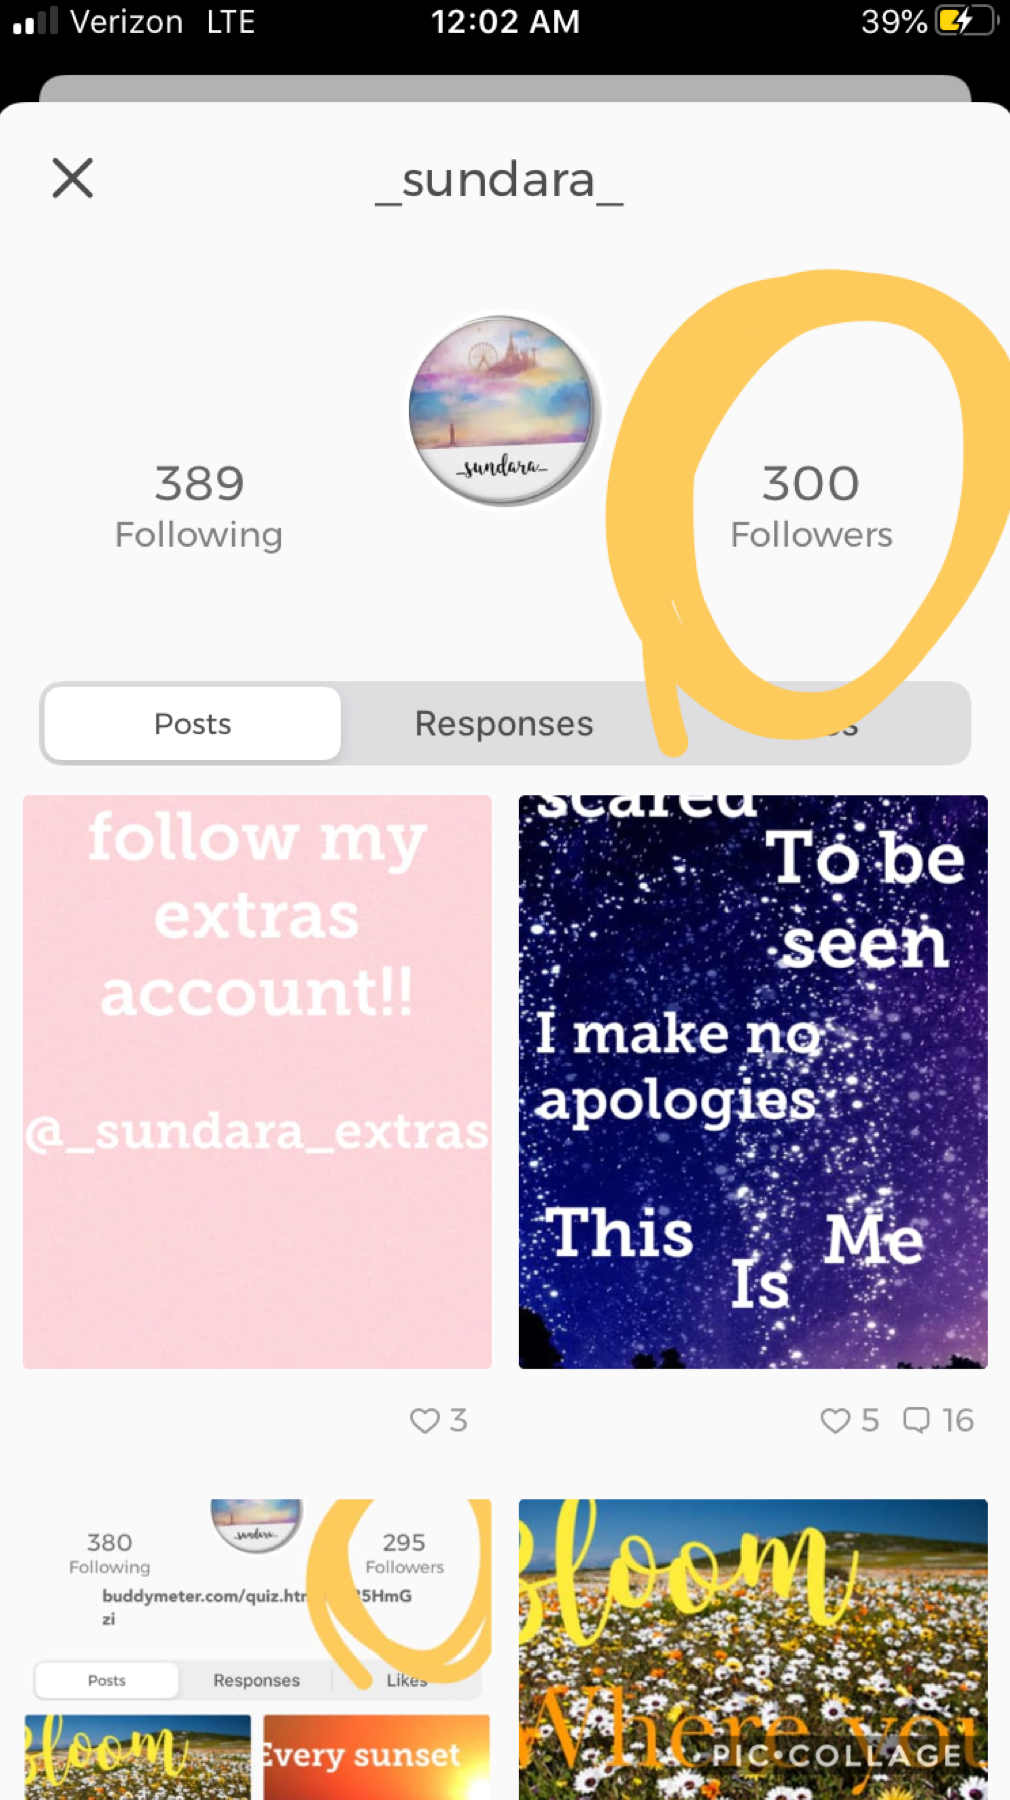 Ok, so I know it is late, but i was so excited because we hit 300 followers!!!!! Thank you all so much!!!!!!!